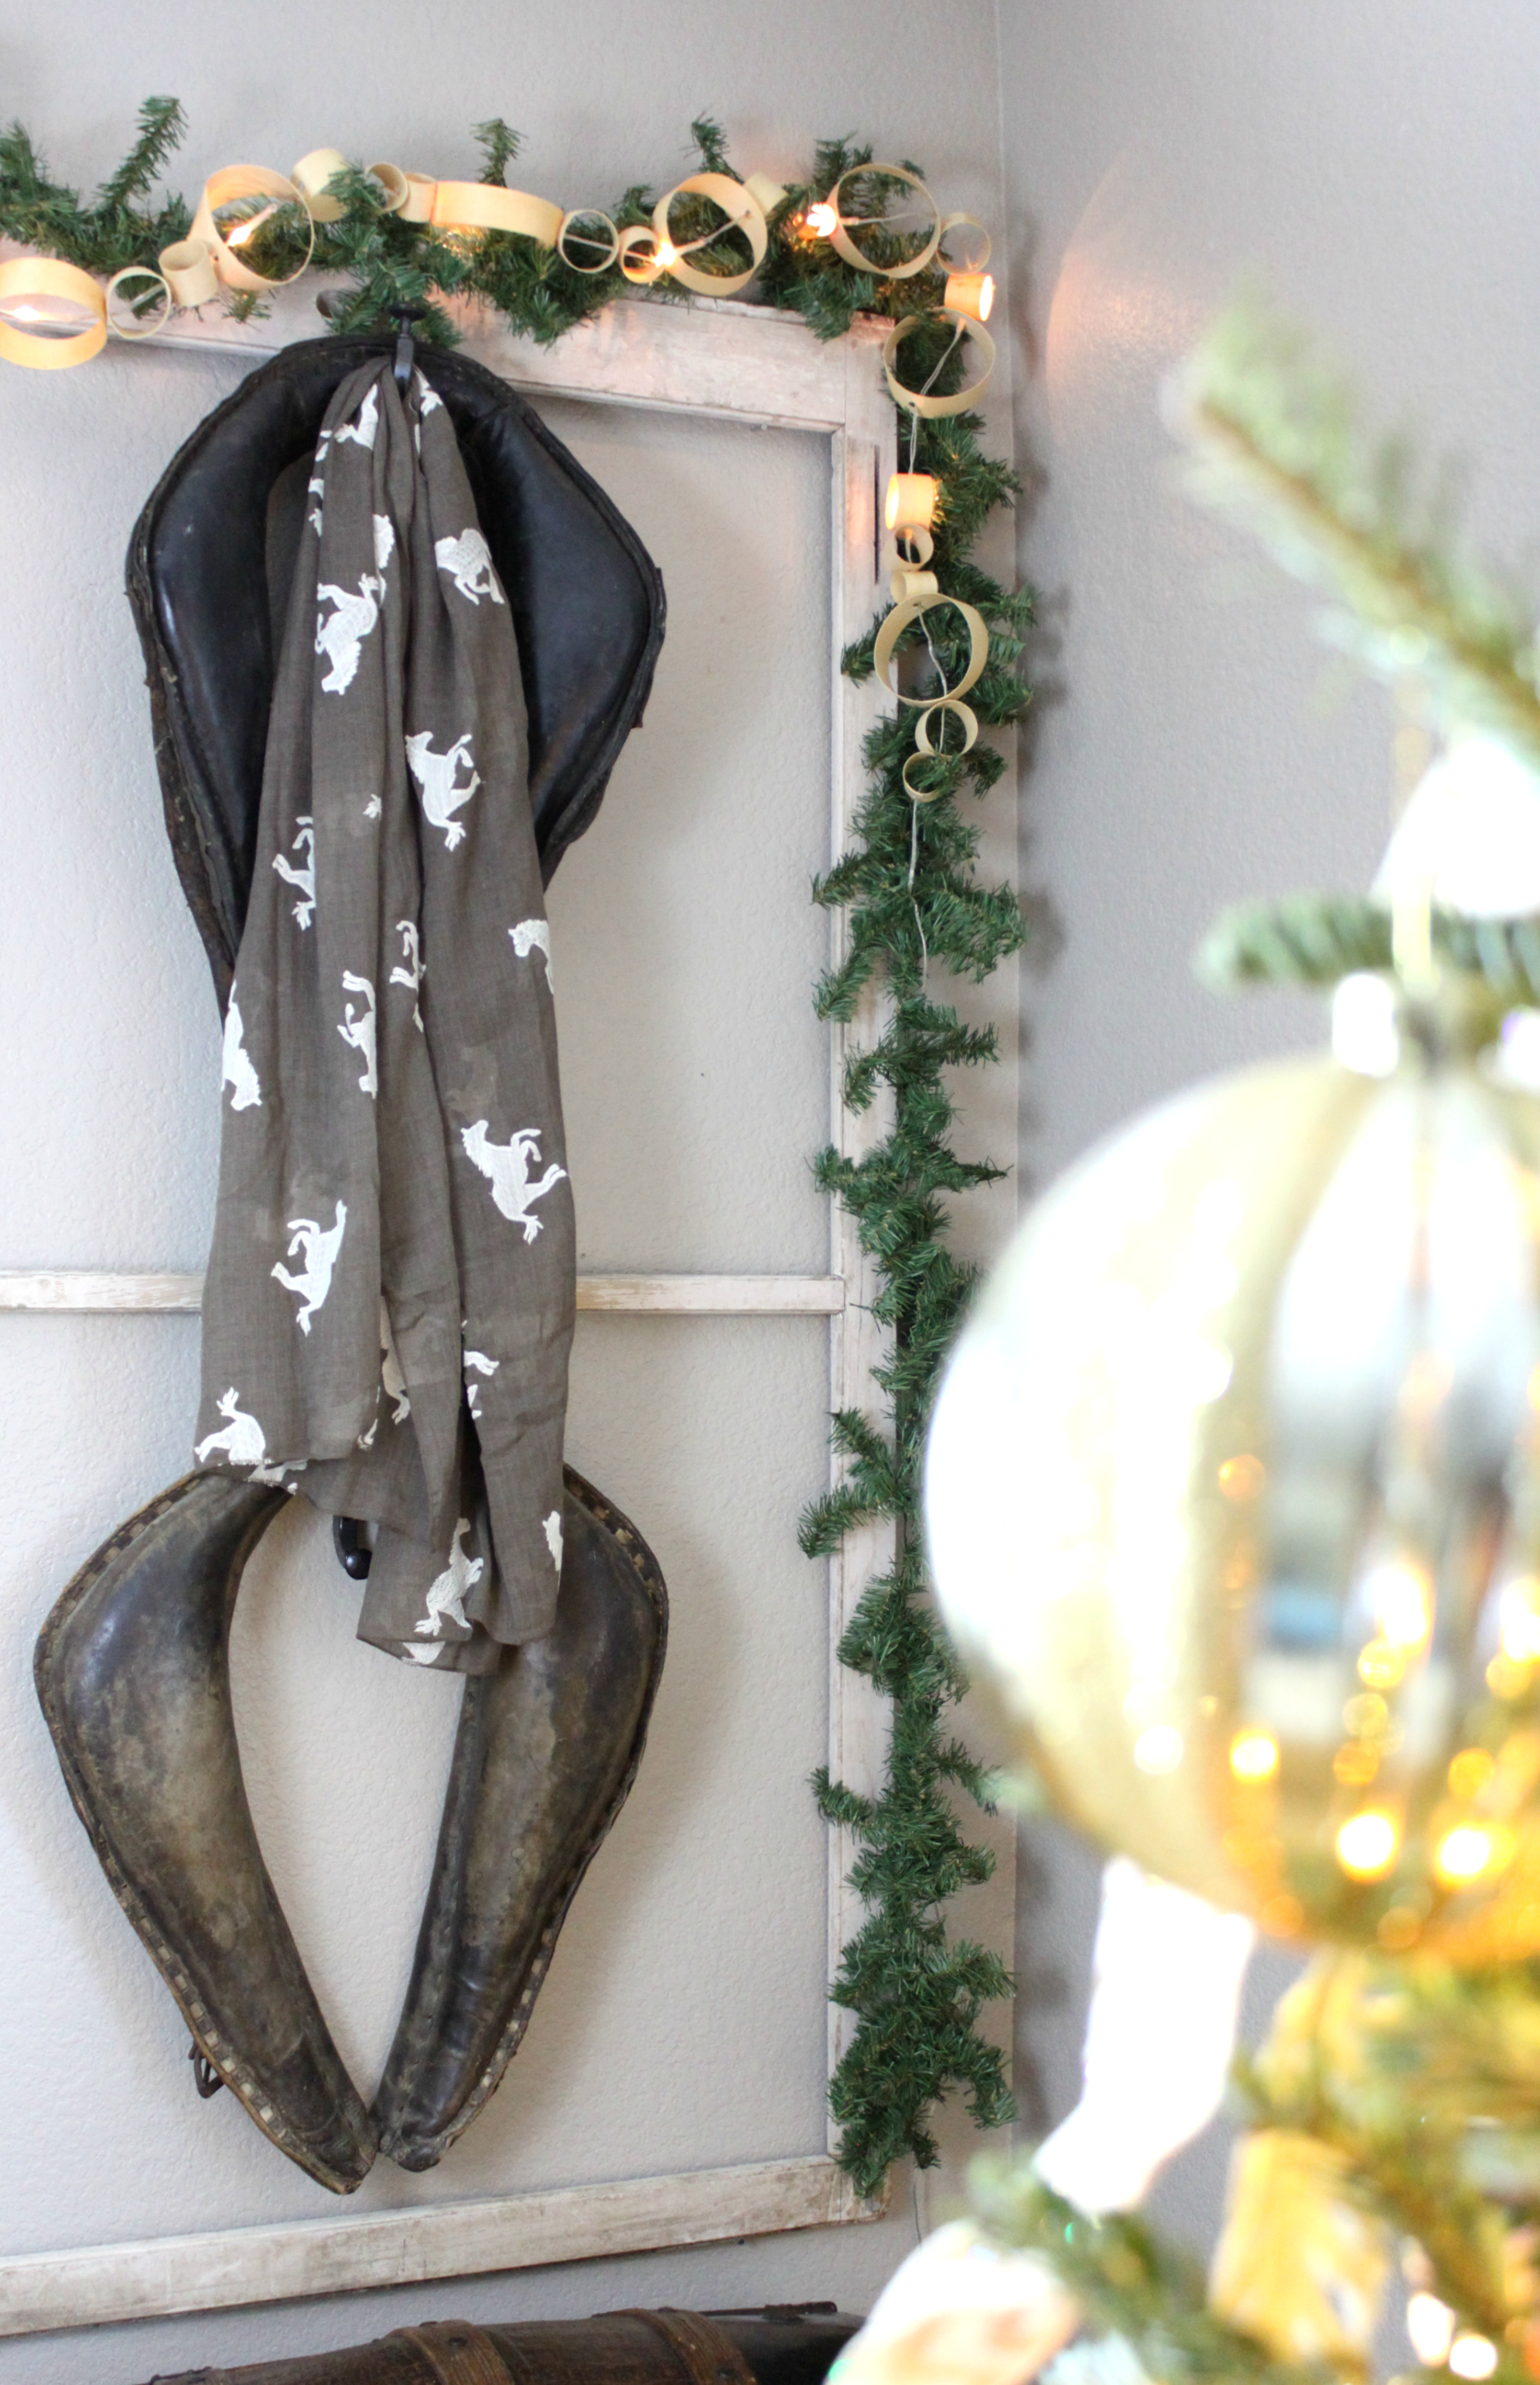 A Christmas Gift Guide to Cracker Barrel Old Country Store | An Inspired Nest